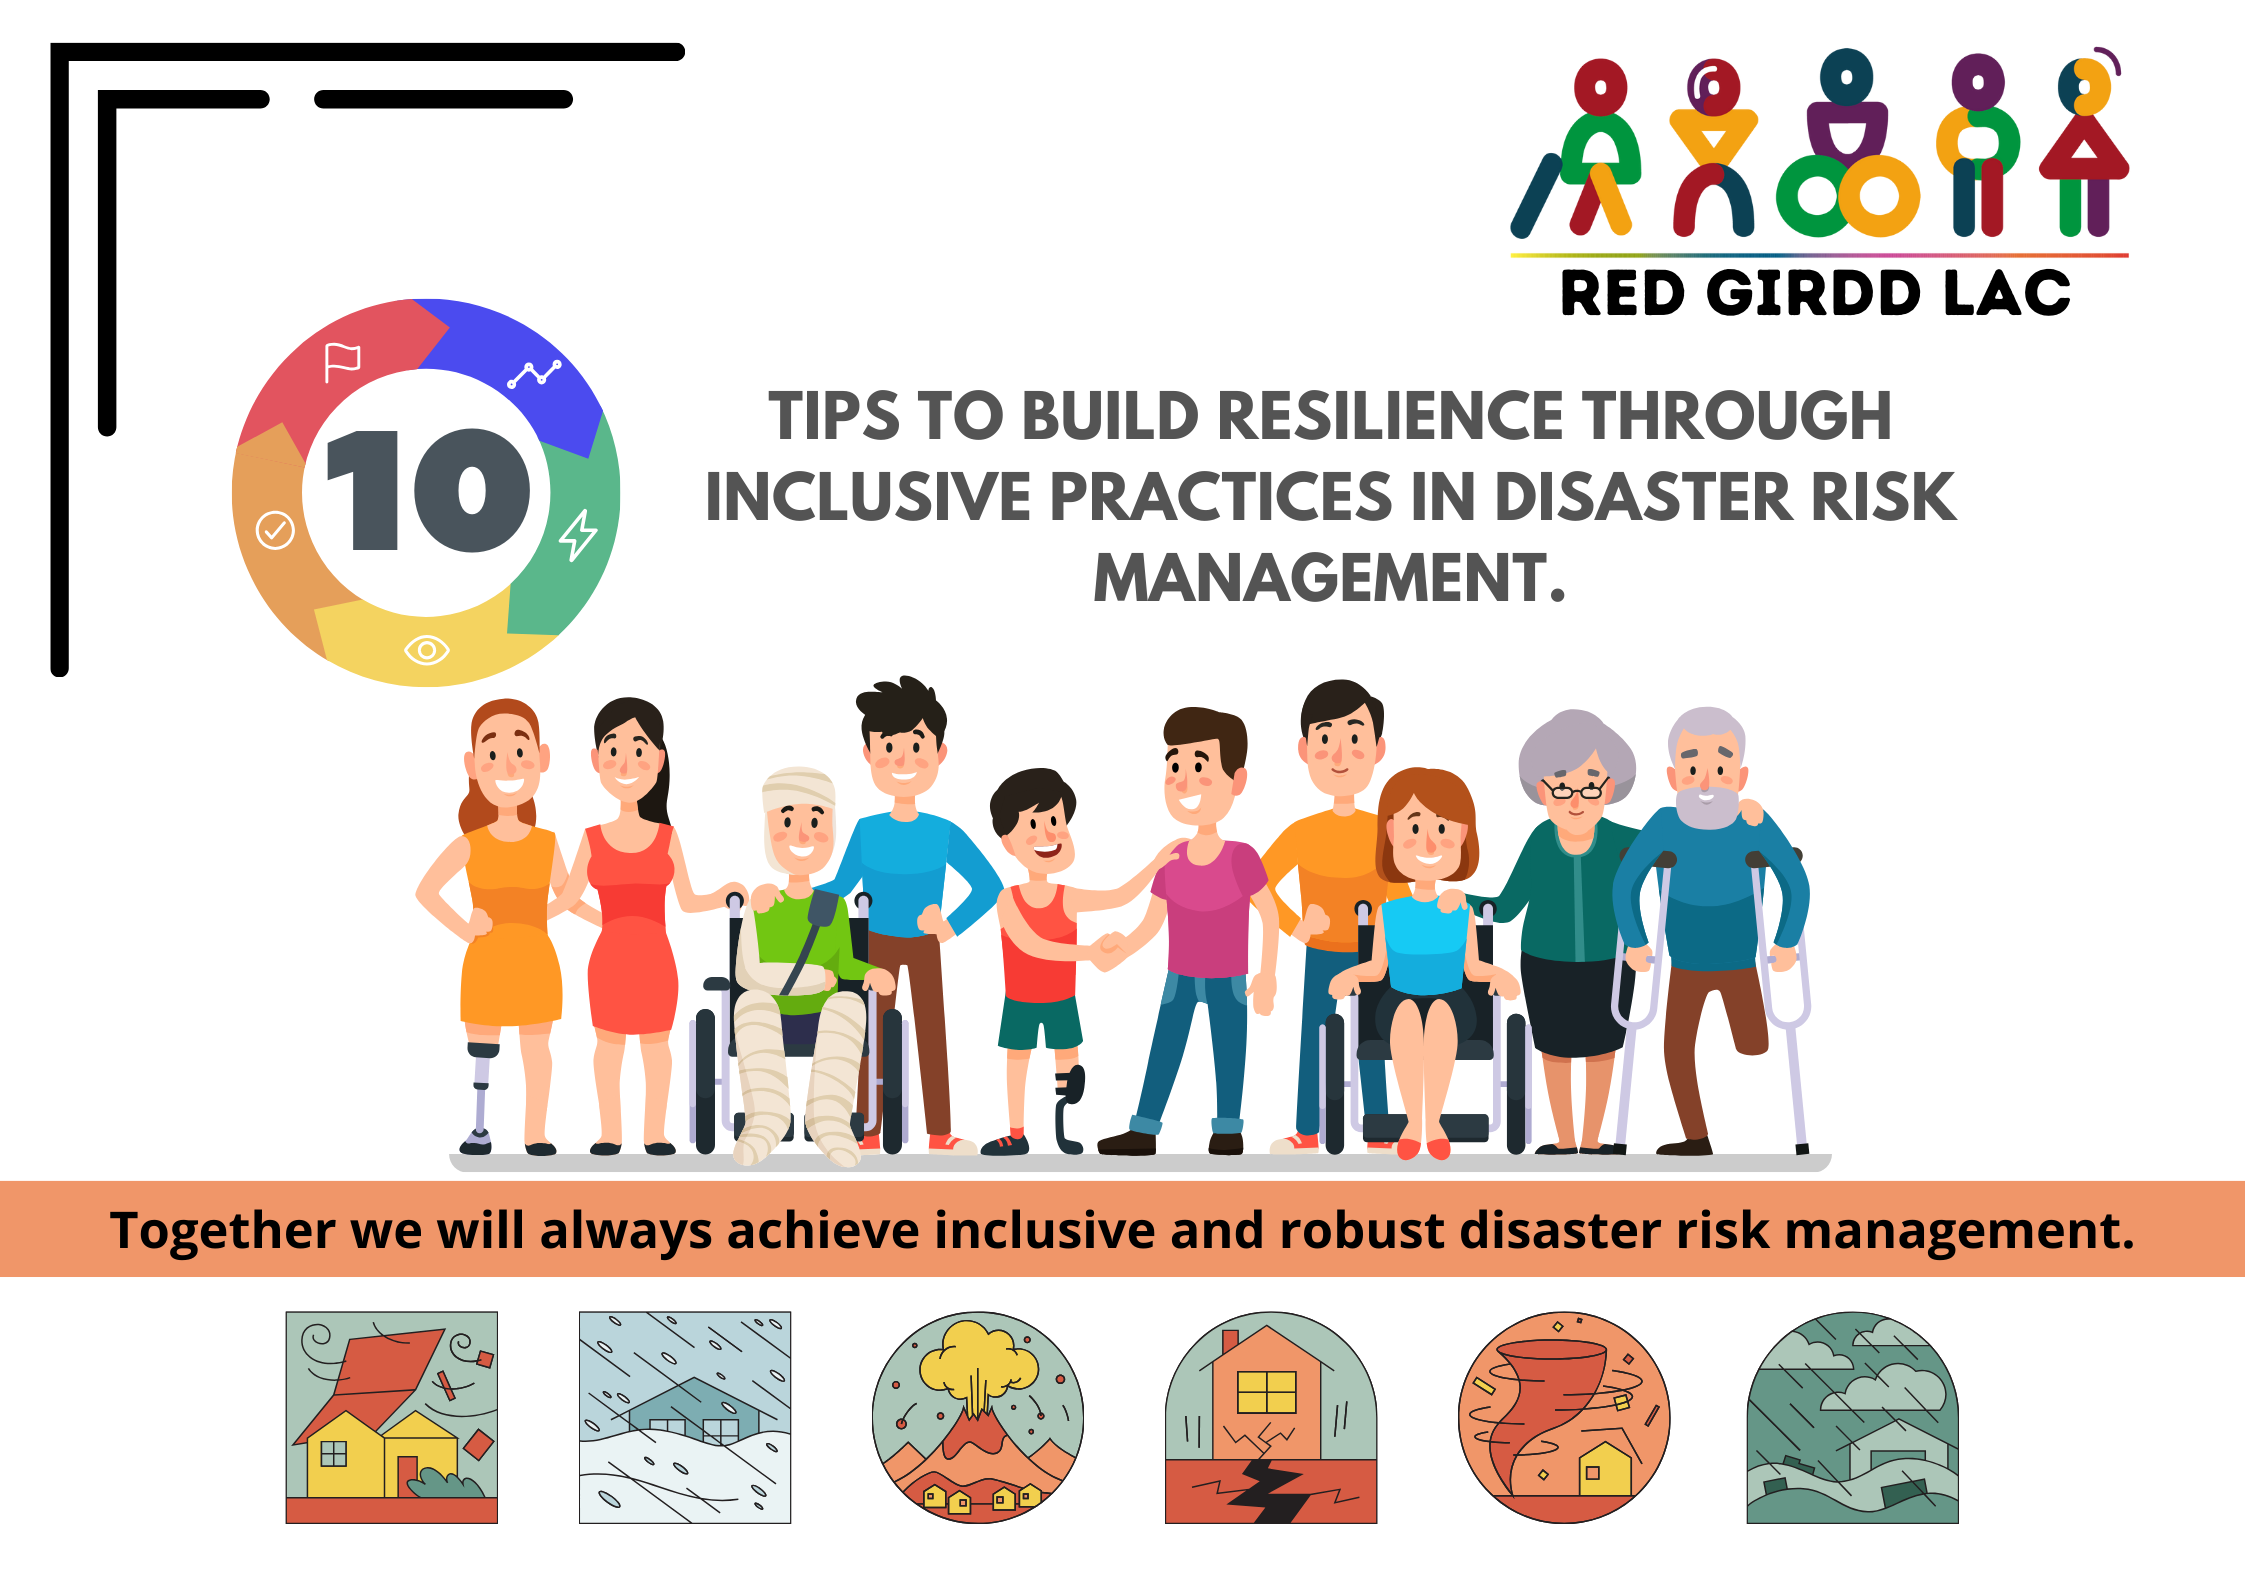 It is a promotional image of an article that has several images of people with different types of disabilities, as well as images of different events of natural disasters, there is also text that says: 10 Tips to promote resilience through inclusive practices in management of disaster risk. Together we will always achieve inclusive and robust disaster risk management.